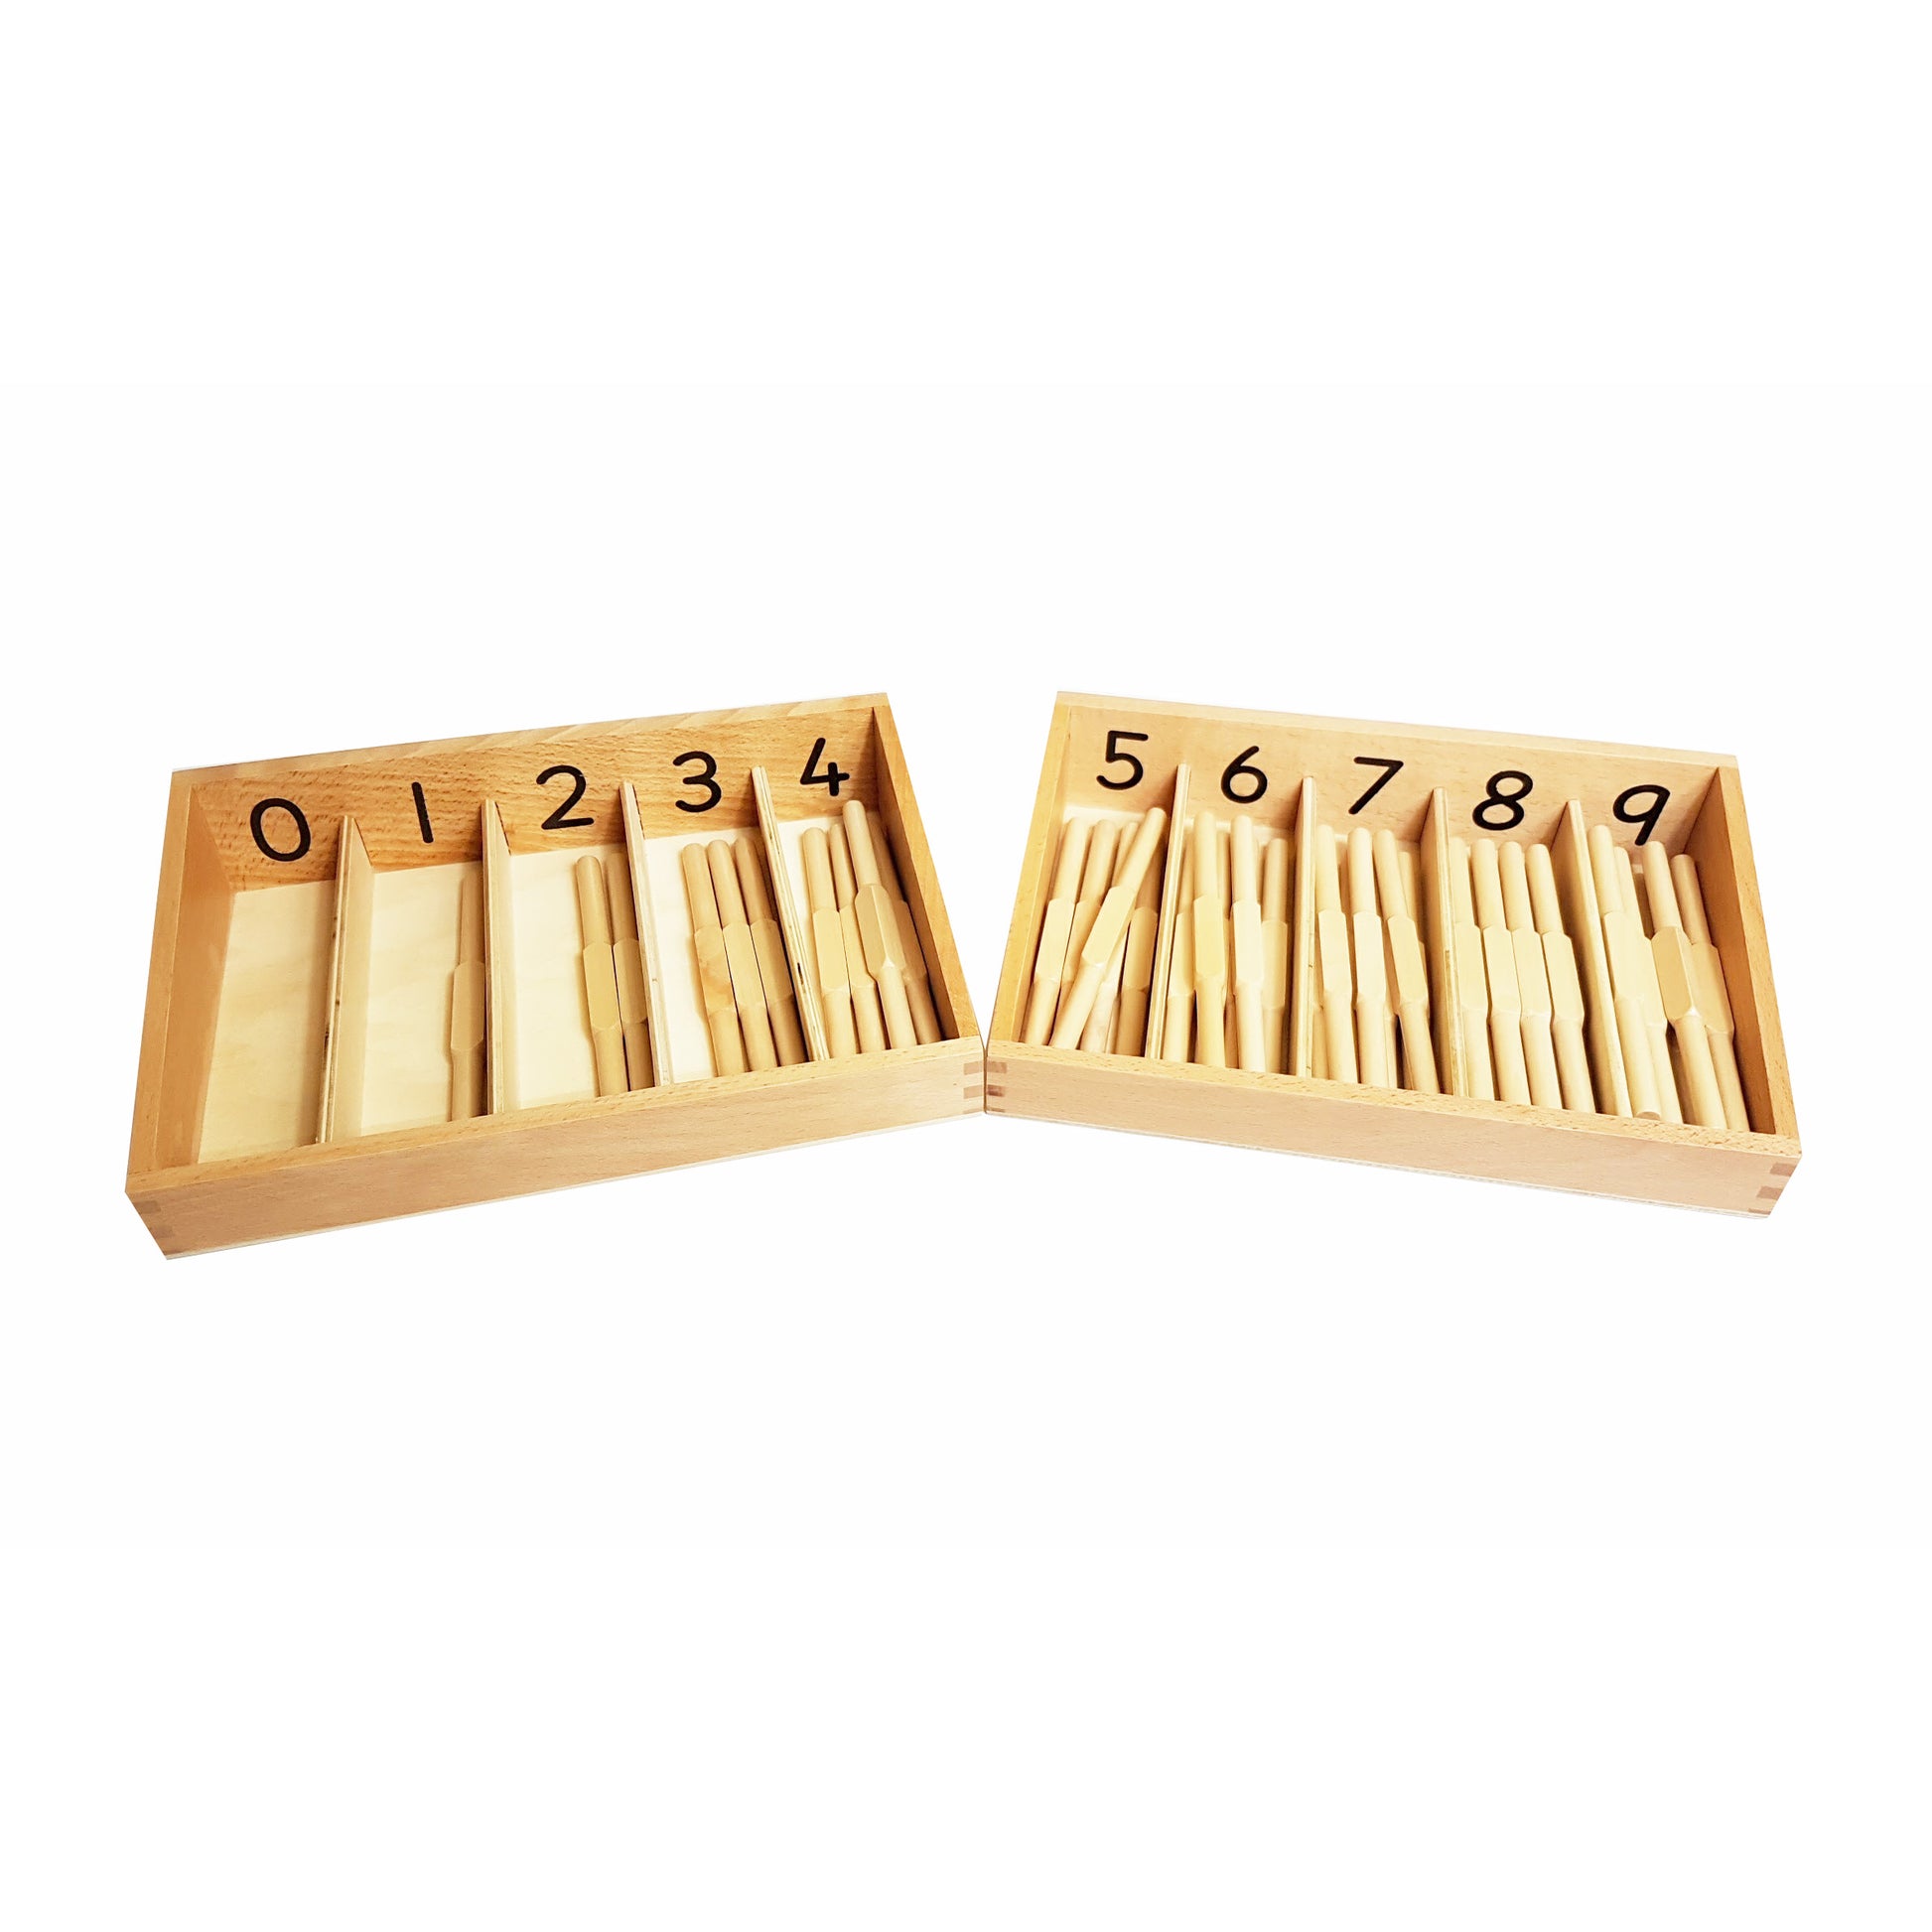 Montessori Spindle Boxes 0-4 and 5-9